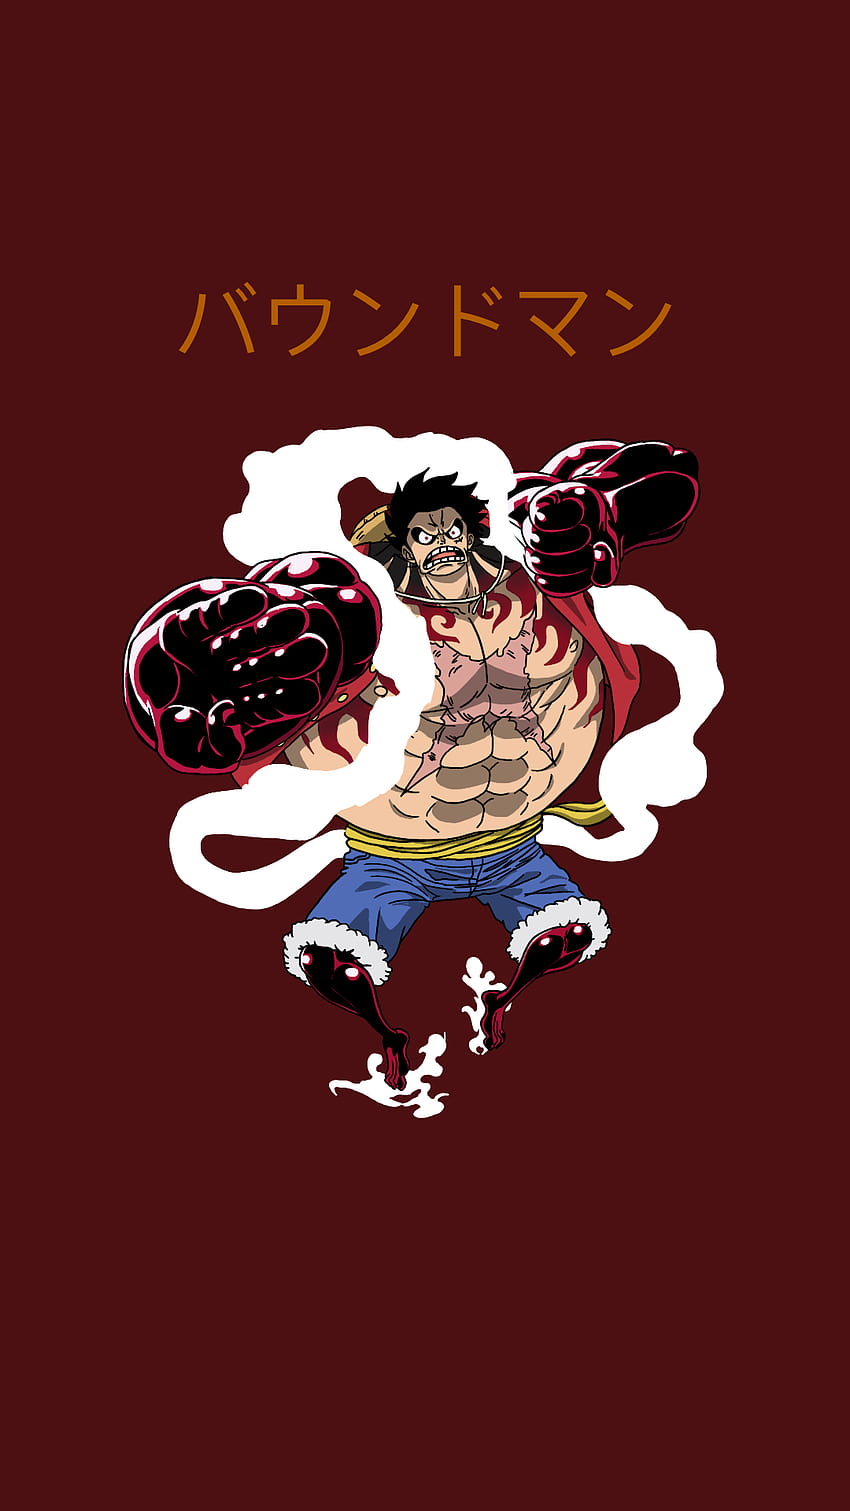 made some gear fourth luffy : r/OnePiece, luffy bounce man HD phone wallpaper